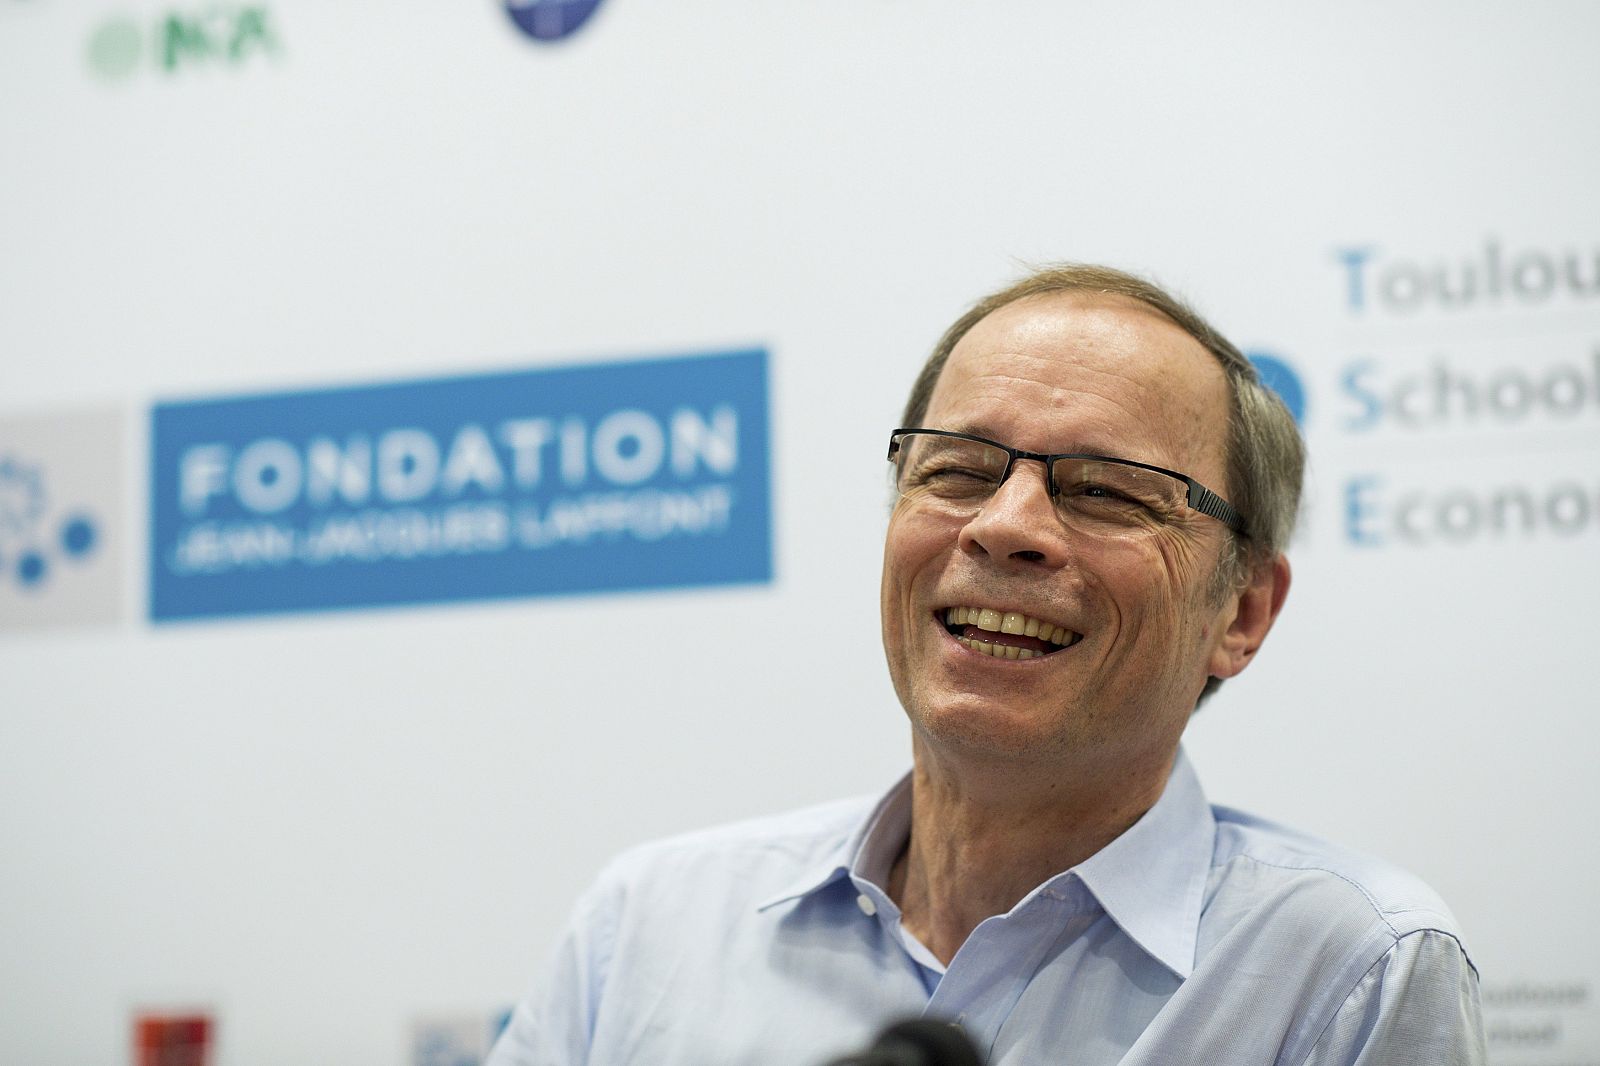 French economist Jean Tirole speaks during a news conference at the Toulouse School of Economics in Toulouse